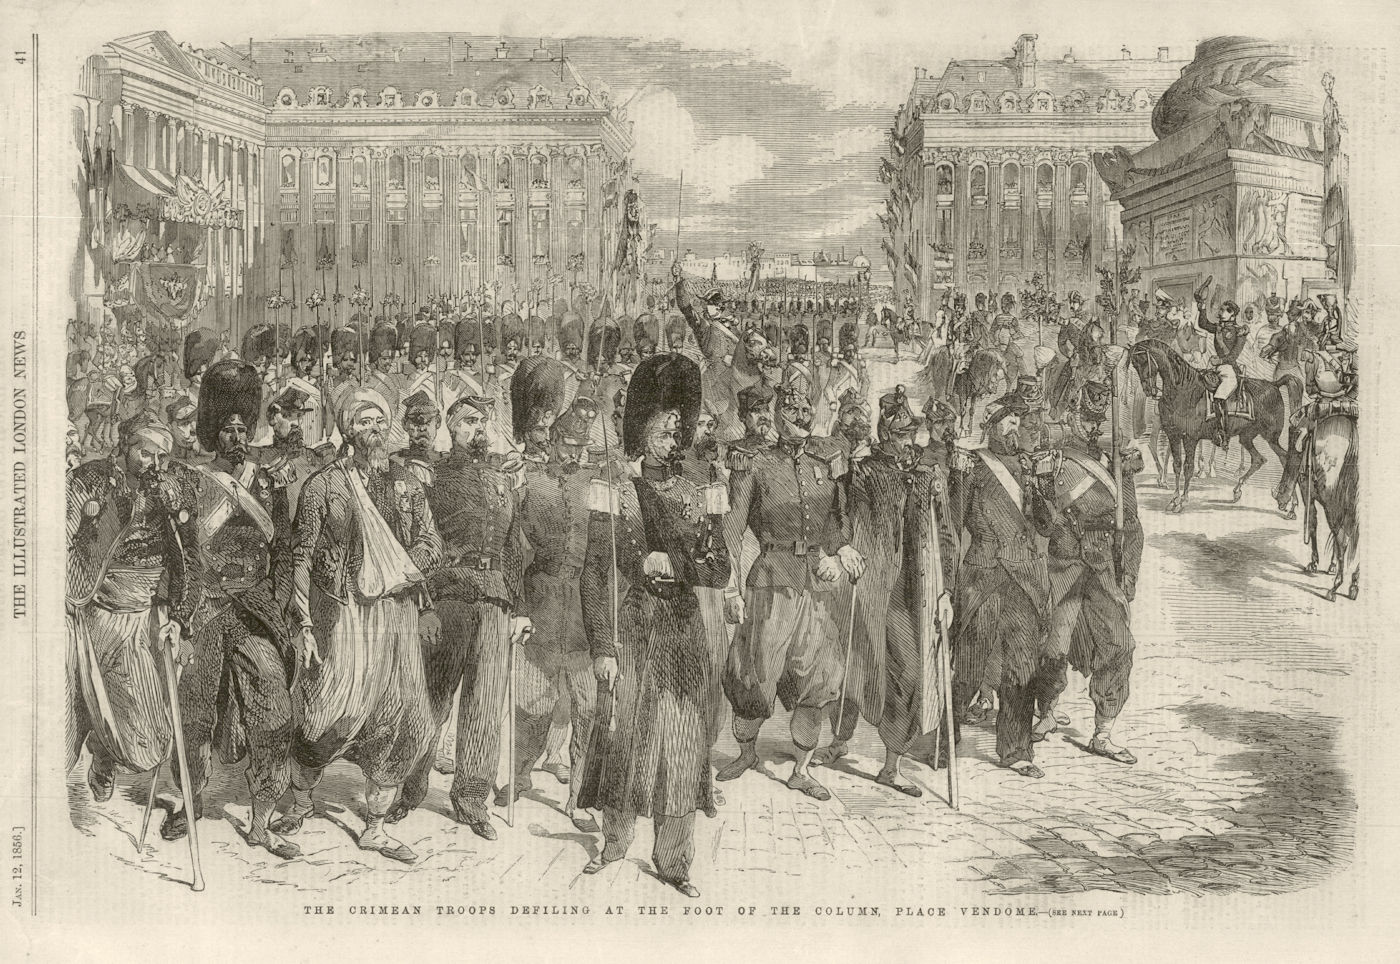 The Crimean troops at the foot of the column, Place Vendome. Paris 1856 print